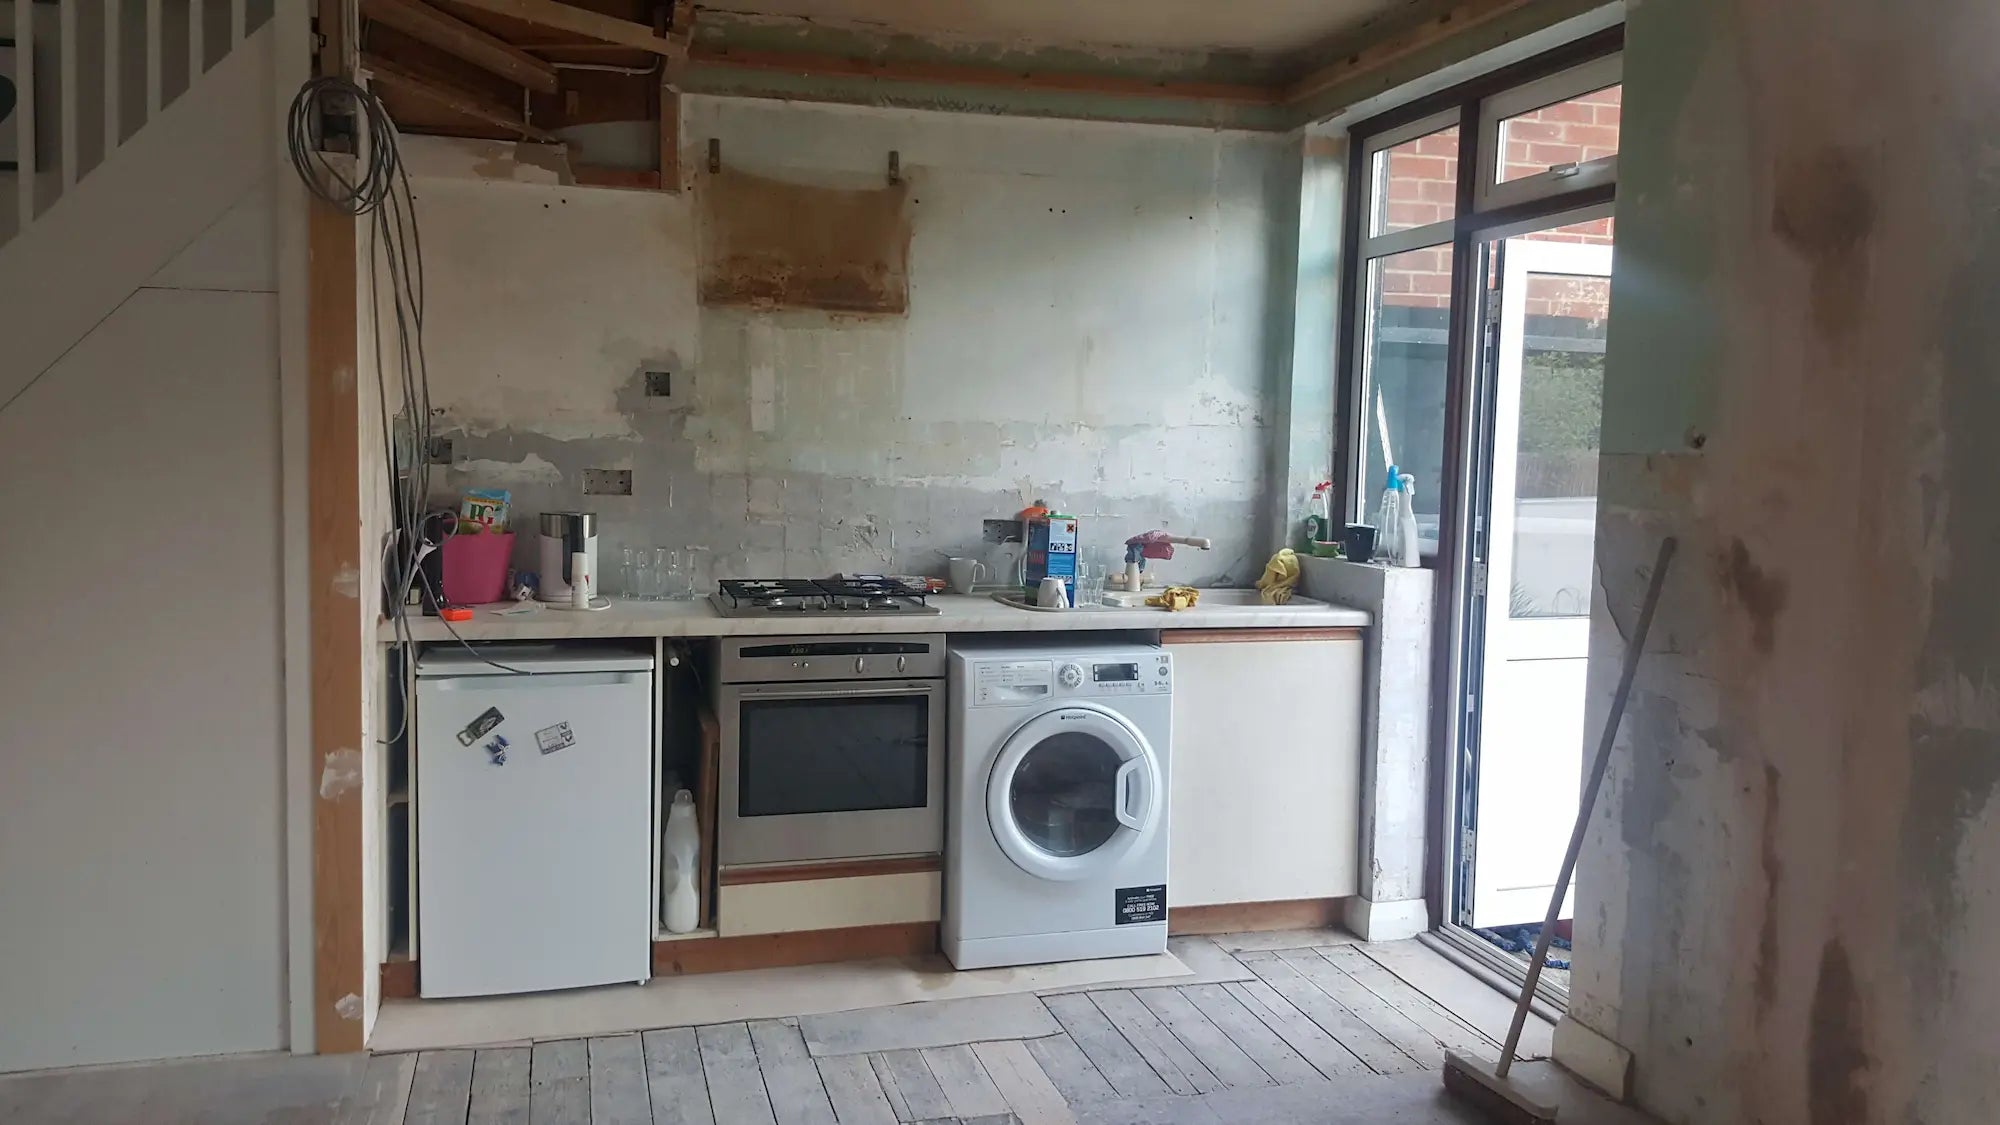 BEFORE Lucy's budget kitchen makeover - see the full before & after on www.lovetohome.co.uk